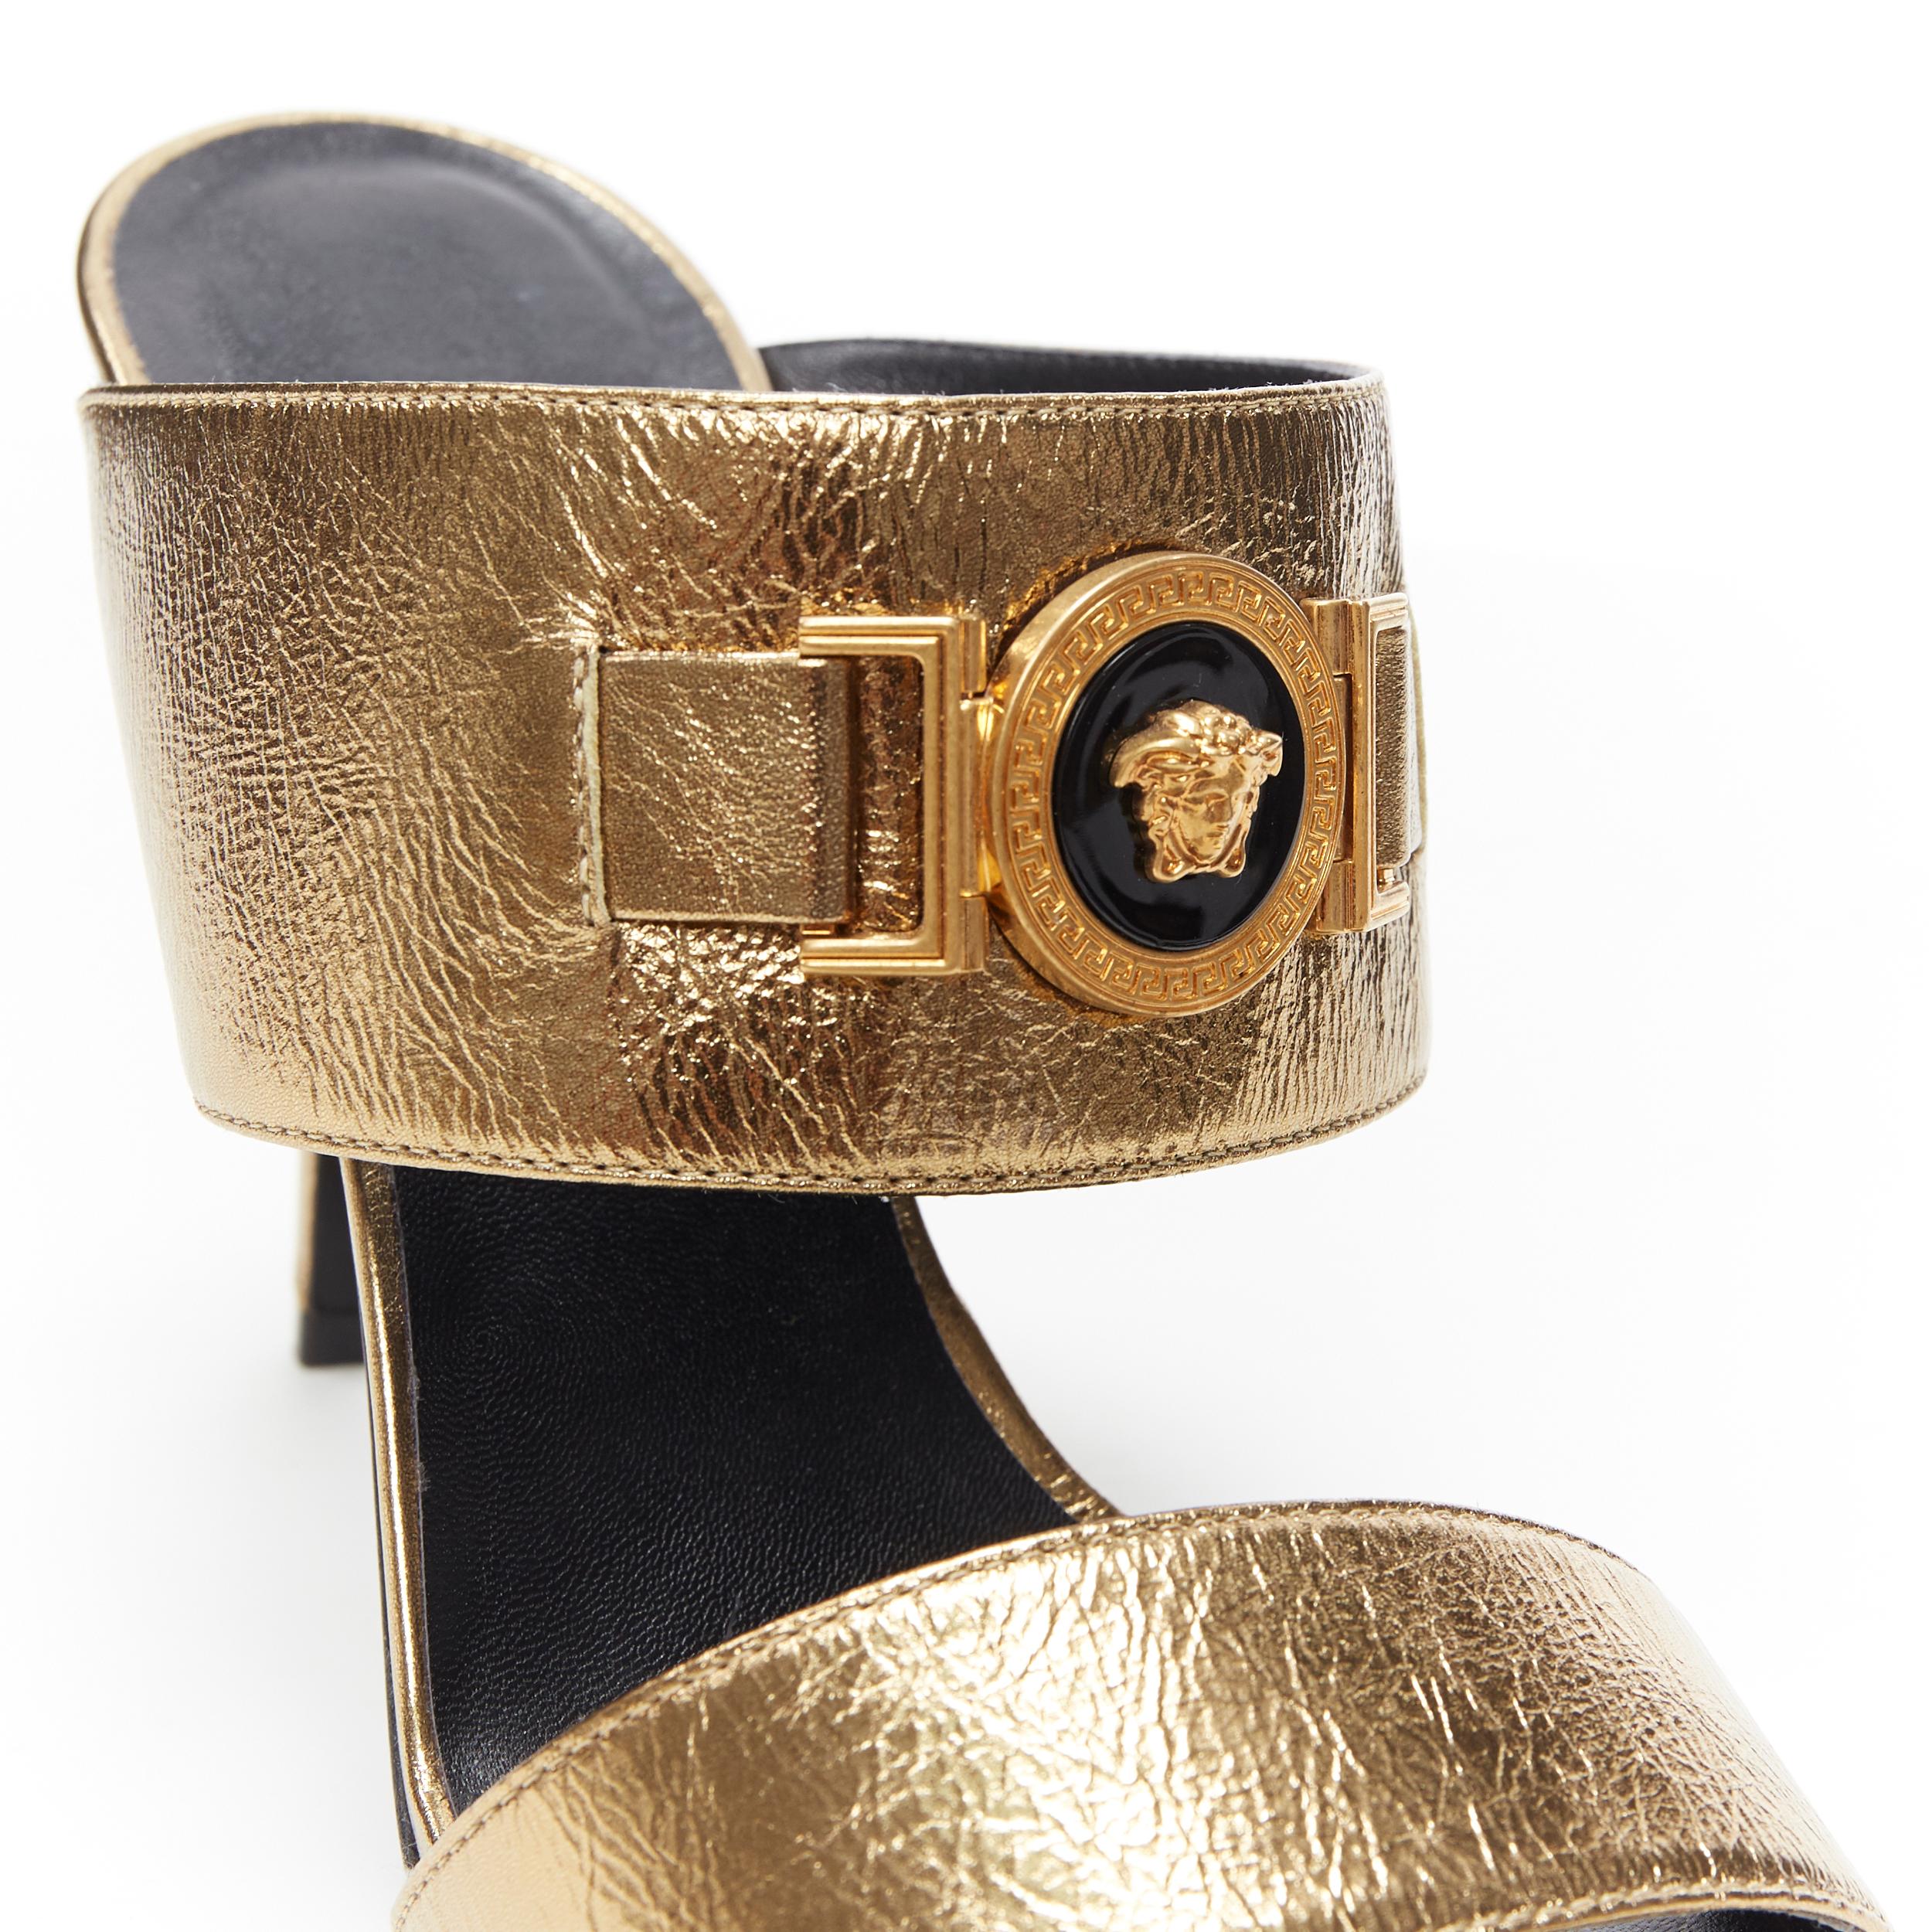 new VERSACE Tribute metallic gold Medusa charm open toe strappy heel mule EU39
Brand: Versace
Designer: Donatella Versace
Collection: Spring Summer 2018
Model Name / Style: Mule sandals
Material: Leather
Color: Gold
Pattern: Solid
Lining material: